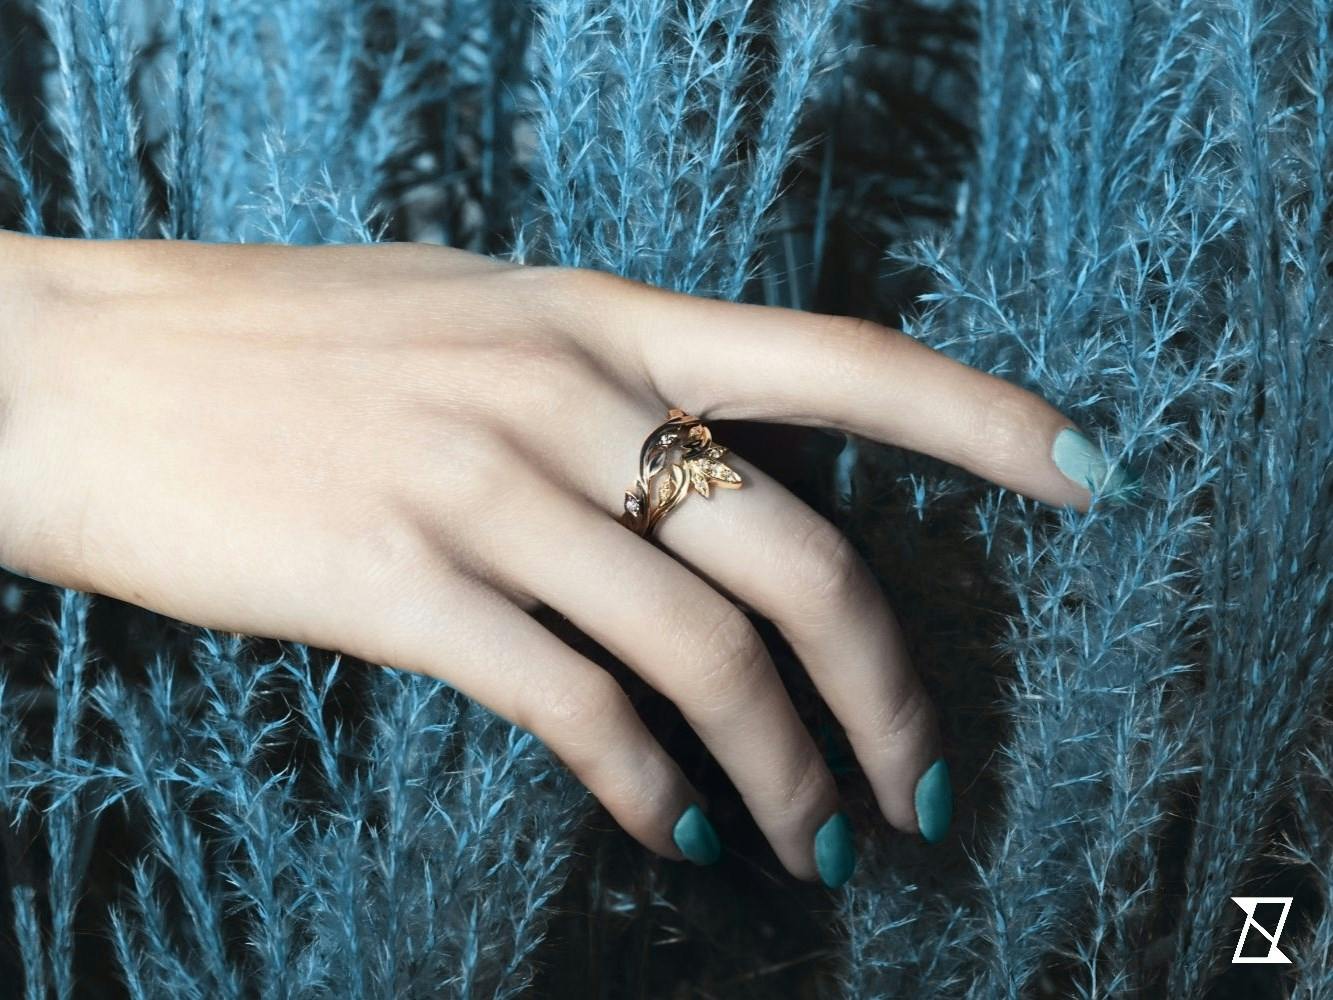 Two floral rings on a finger.